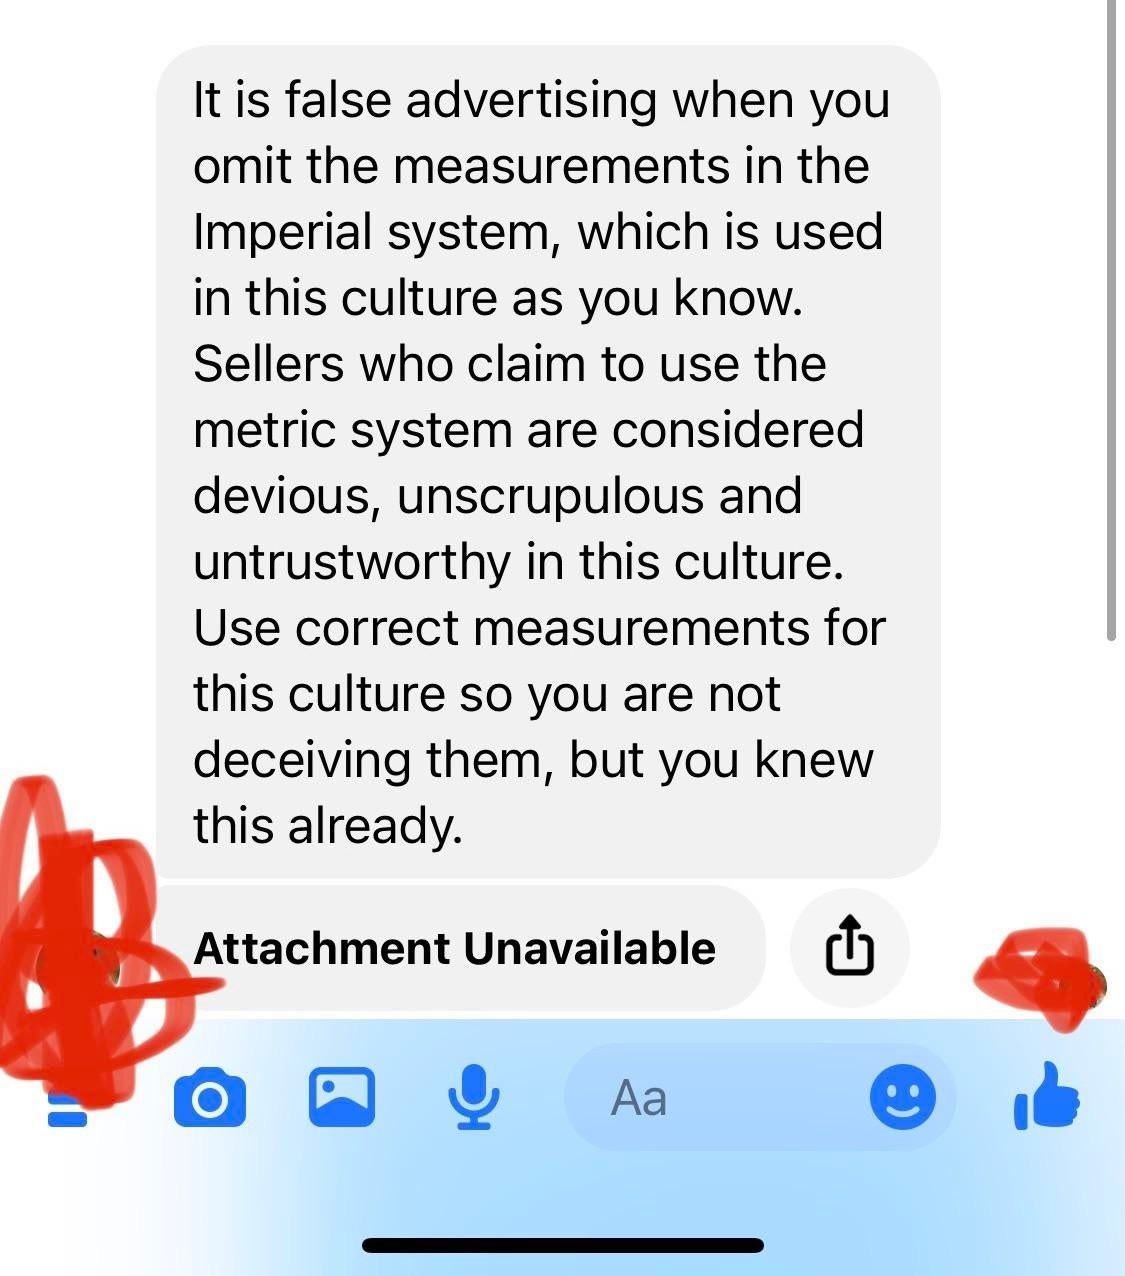 complaints on facebook messenger saying using the metric system is devious in this culture and to use &quot;correct&quot; measurements (aka, the imperial system)